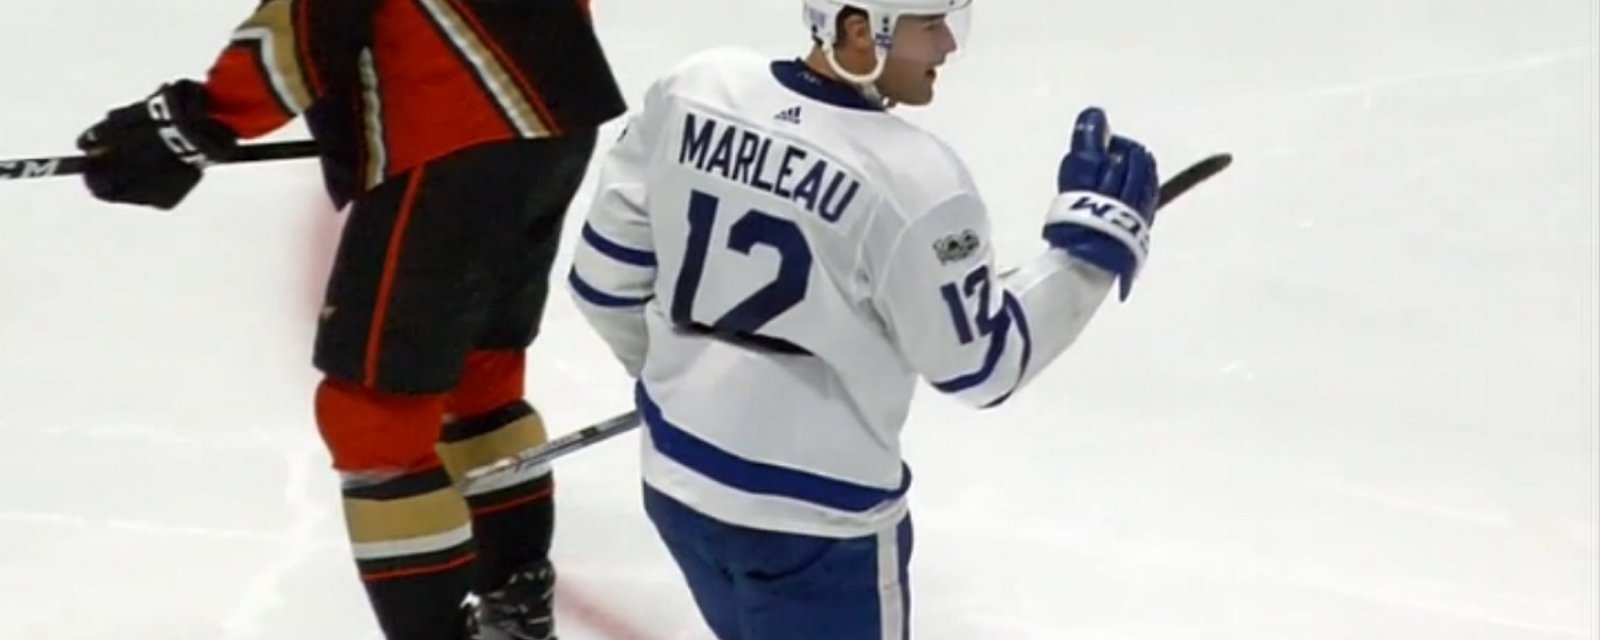 Marleau scores, Babcock's new line comes up big a second time.